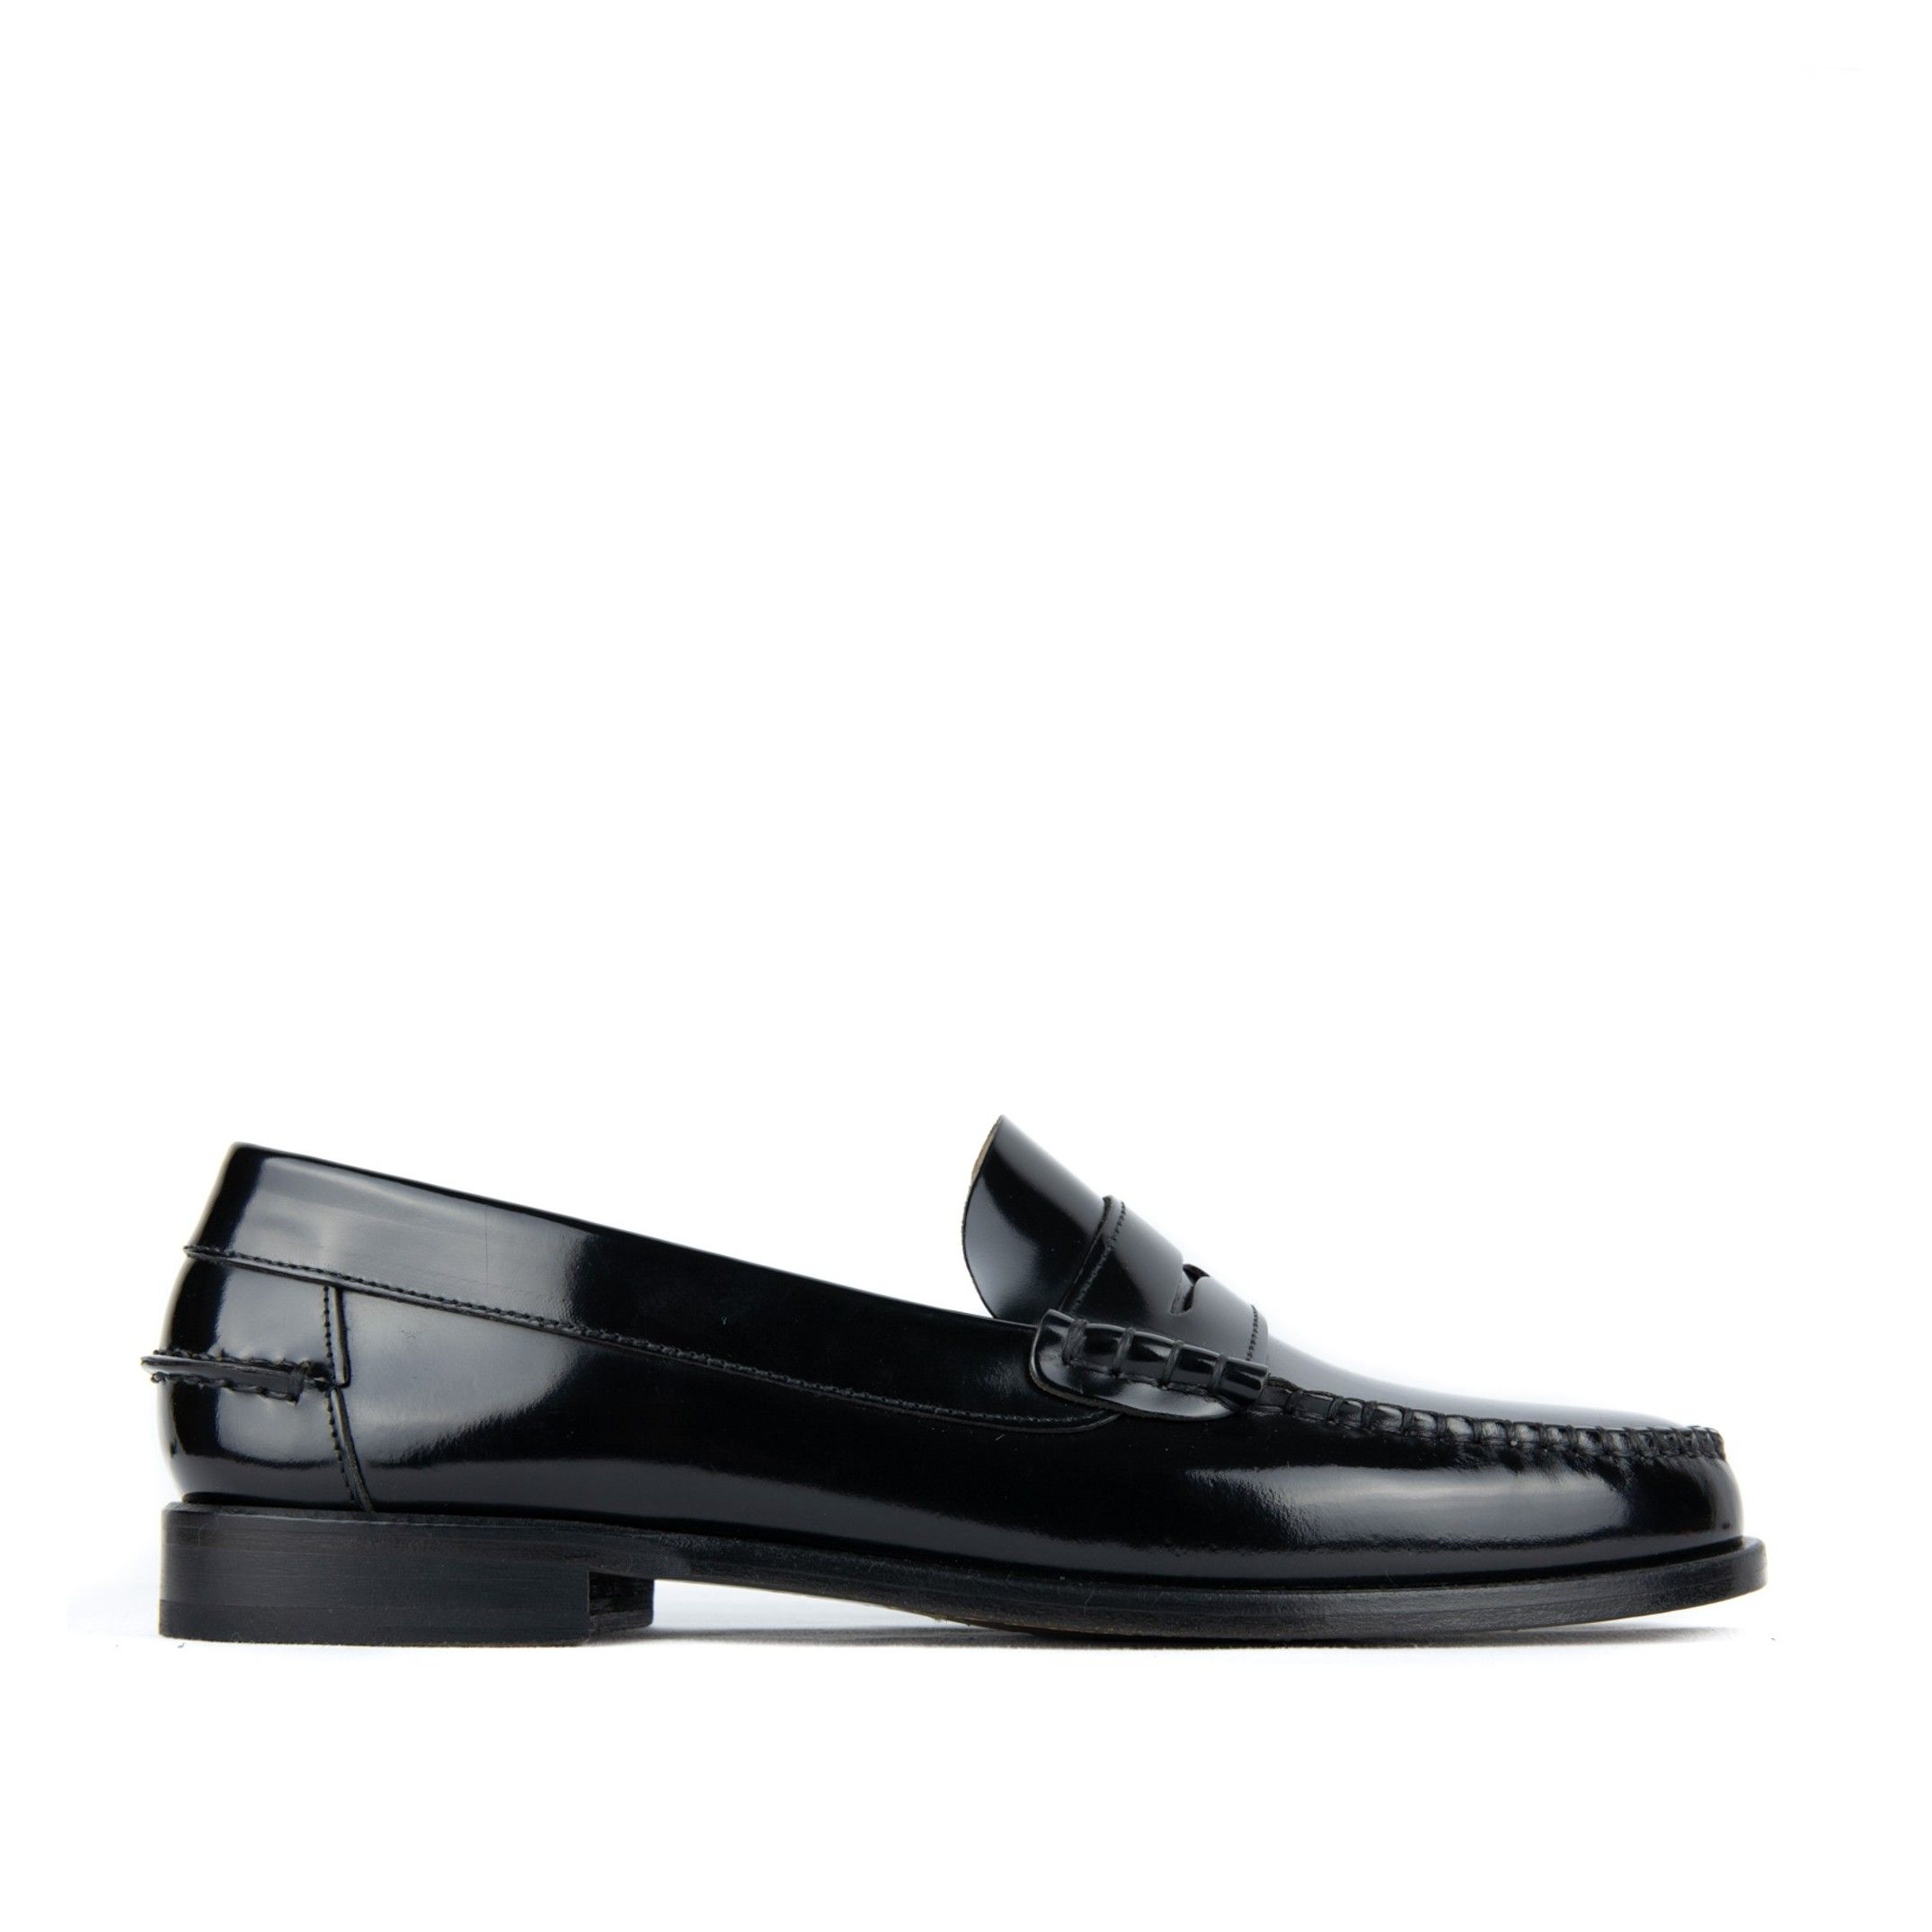 Florentic leather loafers for men. Premium collection of Son Castellanisimos. Outer: cowhide leather. Inner: Cowhide leather. Closure: no closure / open. Inner lining and insole: cowhide leather. Outsole Material: high quality leather. Heel height: 2 cm. Designed and manufactured in Spain.